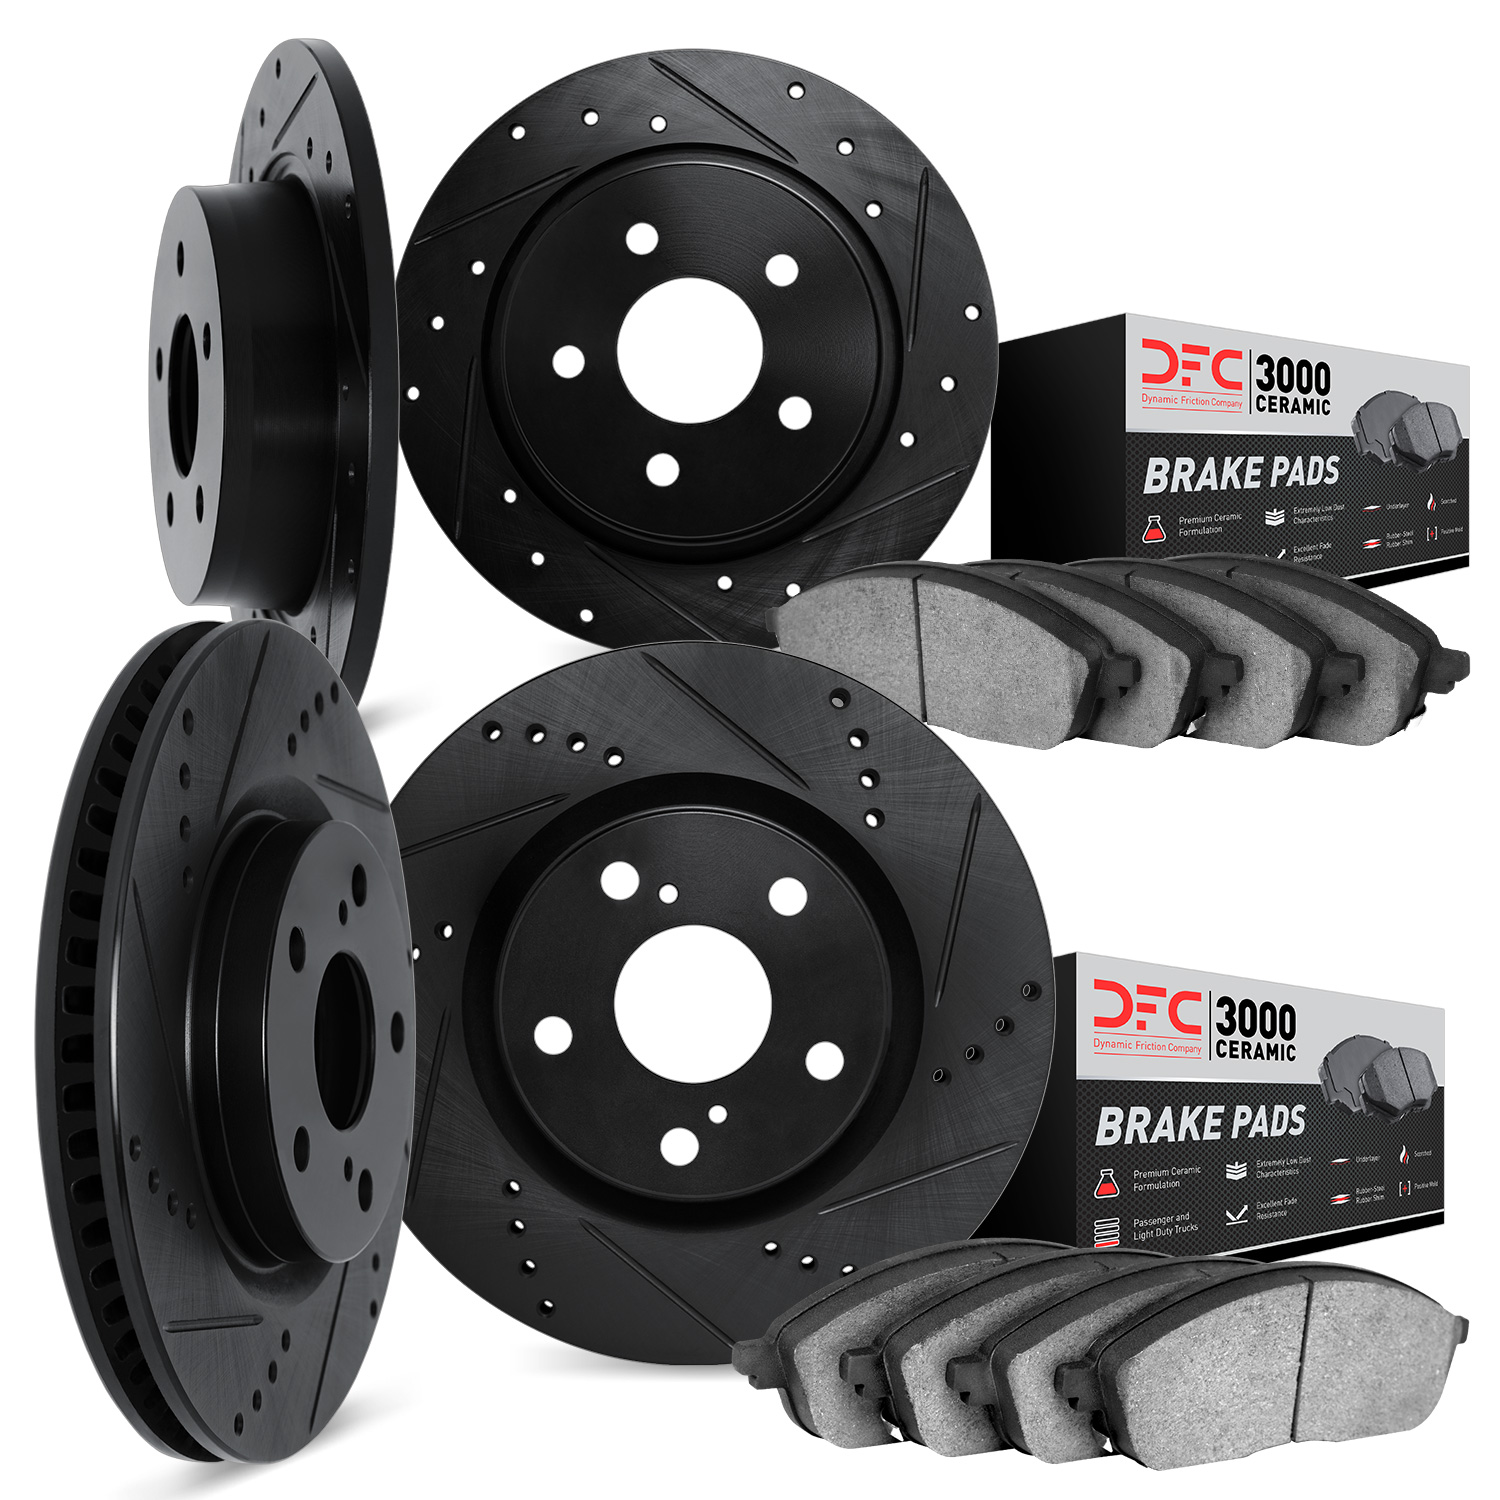 8304-13008 Drilled/Slotted Brake Rotors with 3000-Series Ceramic Brake Pads Kit [Black], 1997-1999 Subaru, Position: Front and R